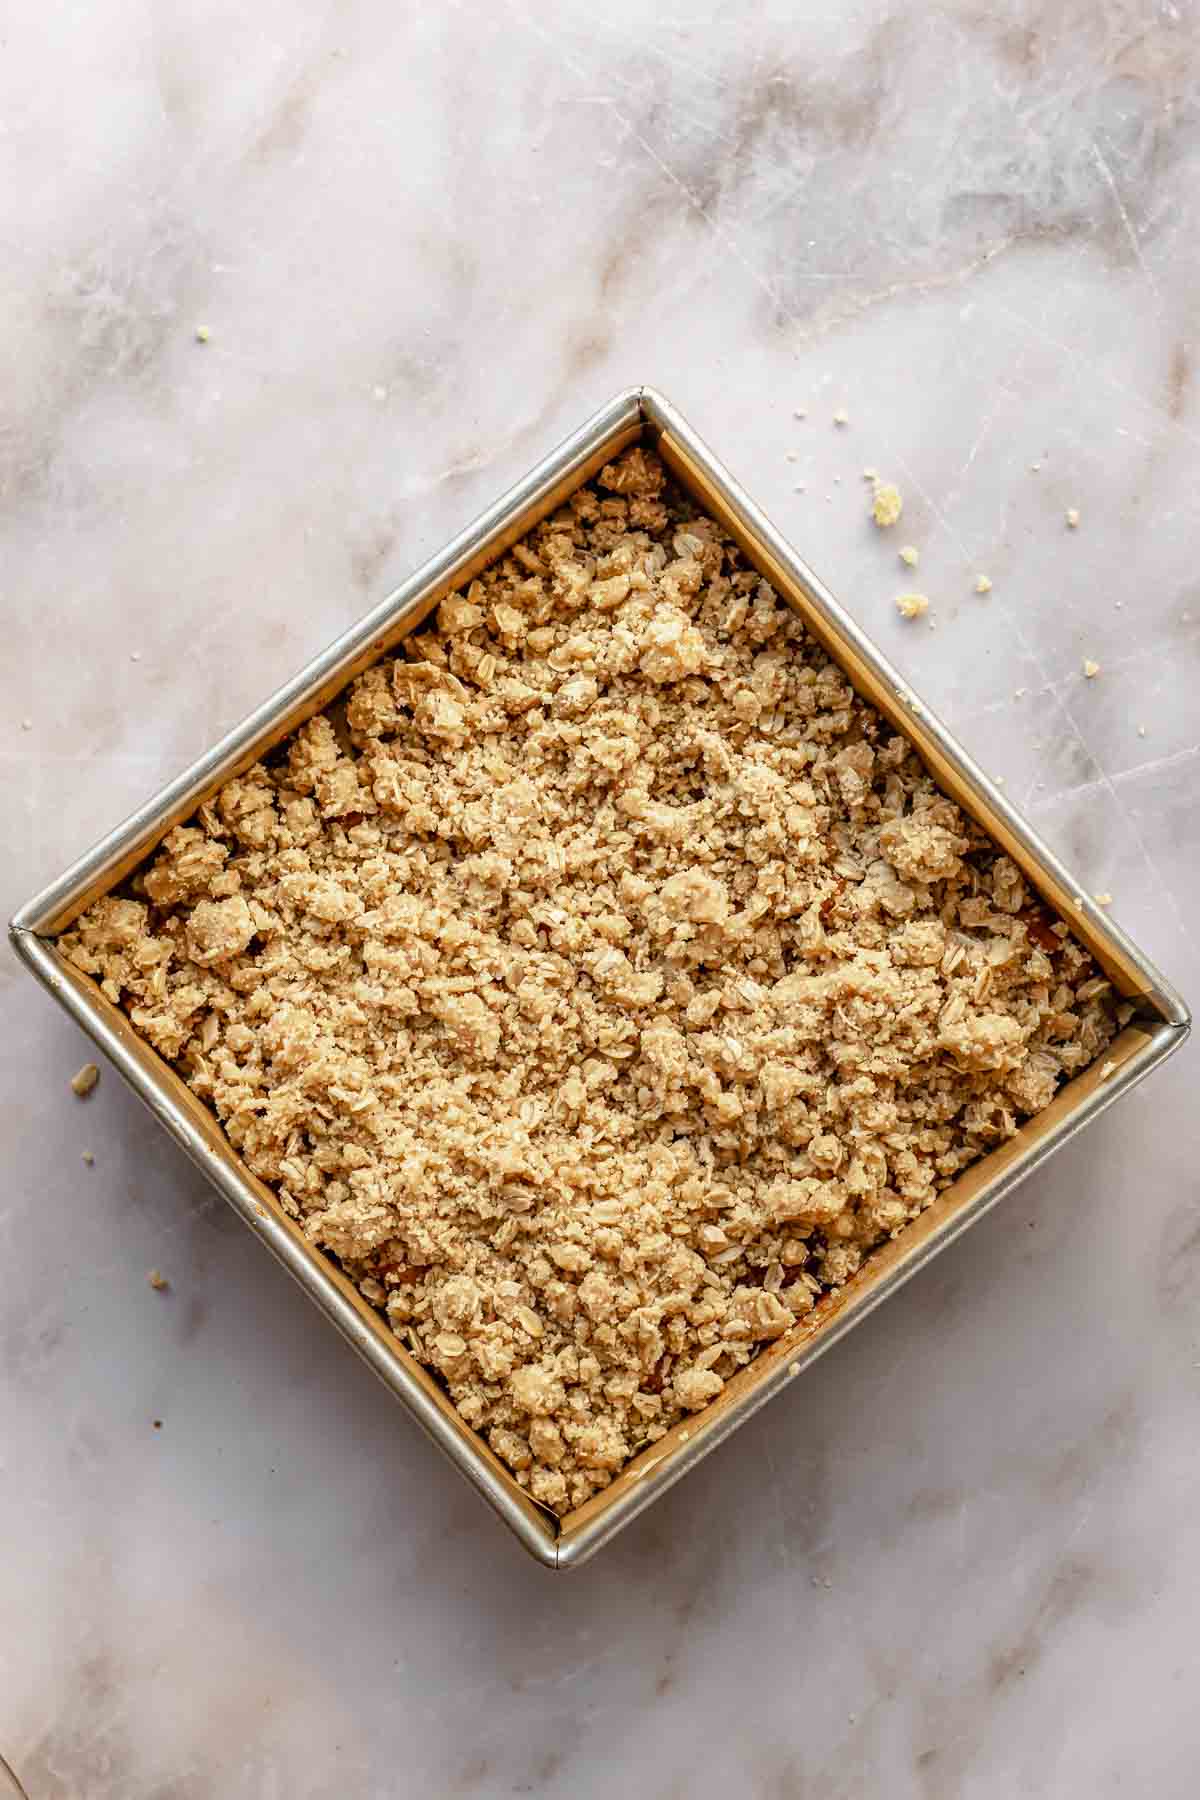 Crumb topping on top of the coffee cake.